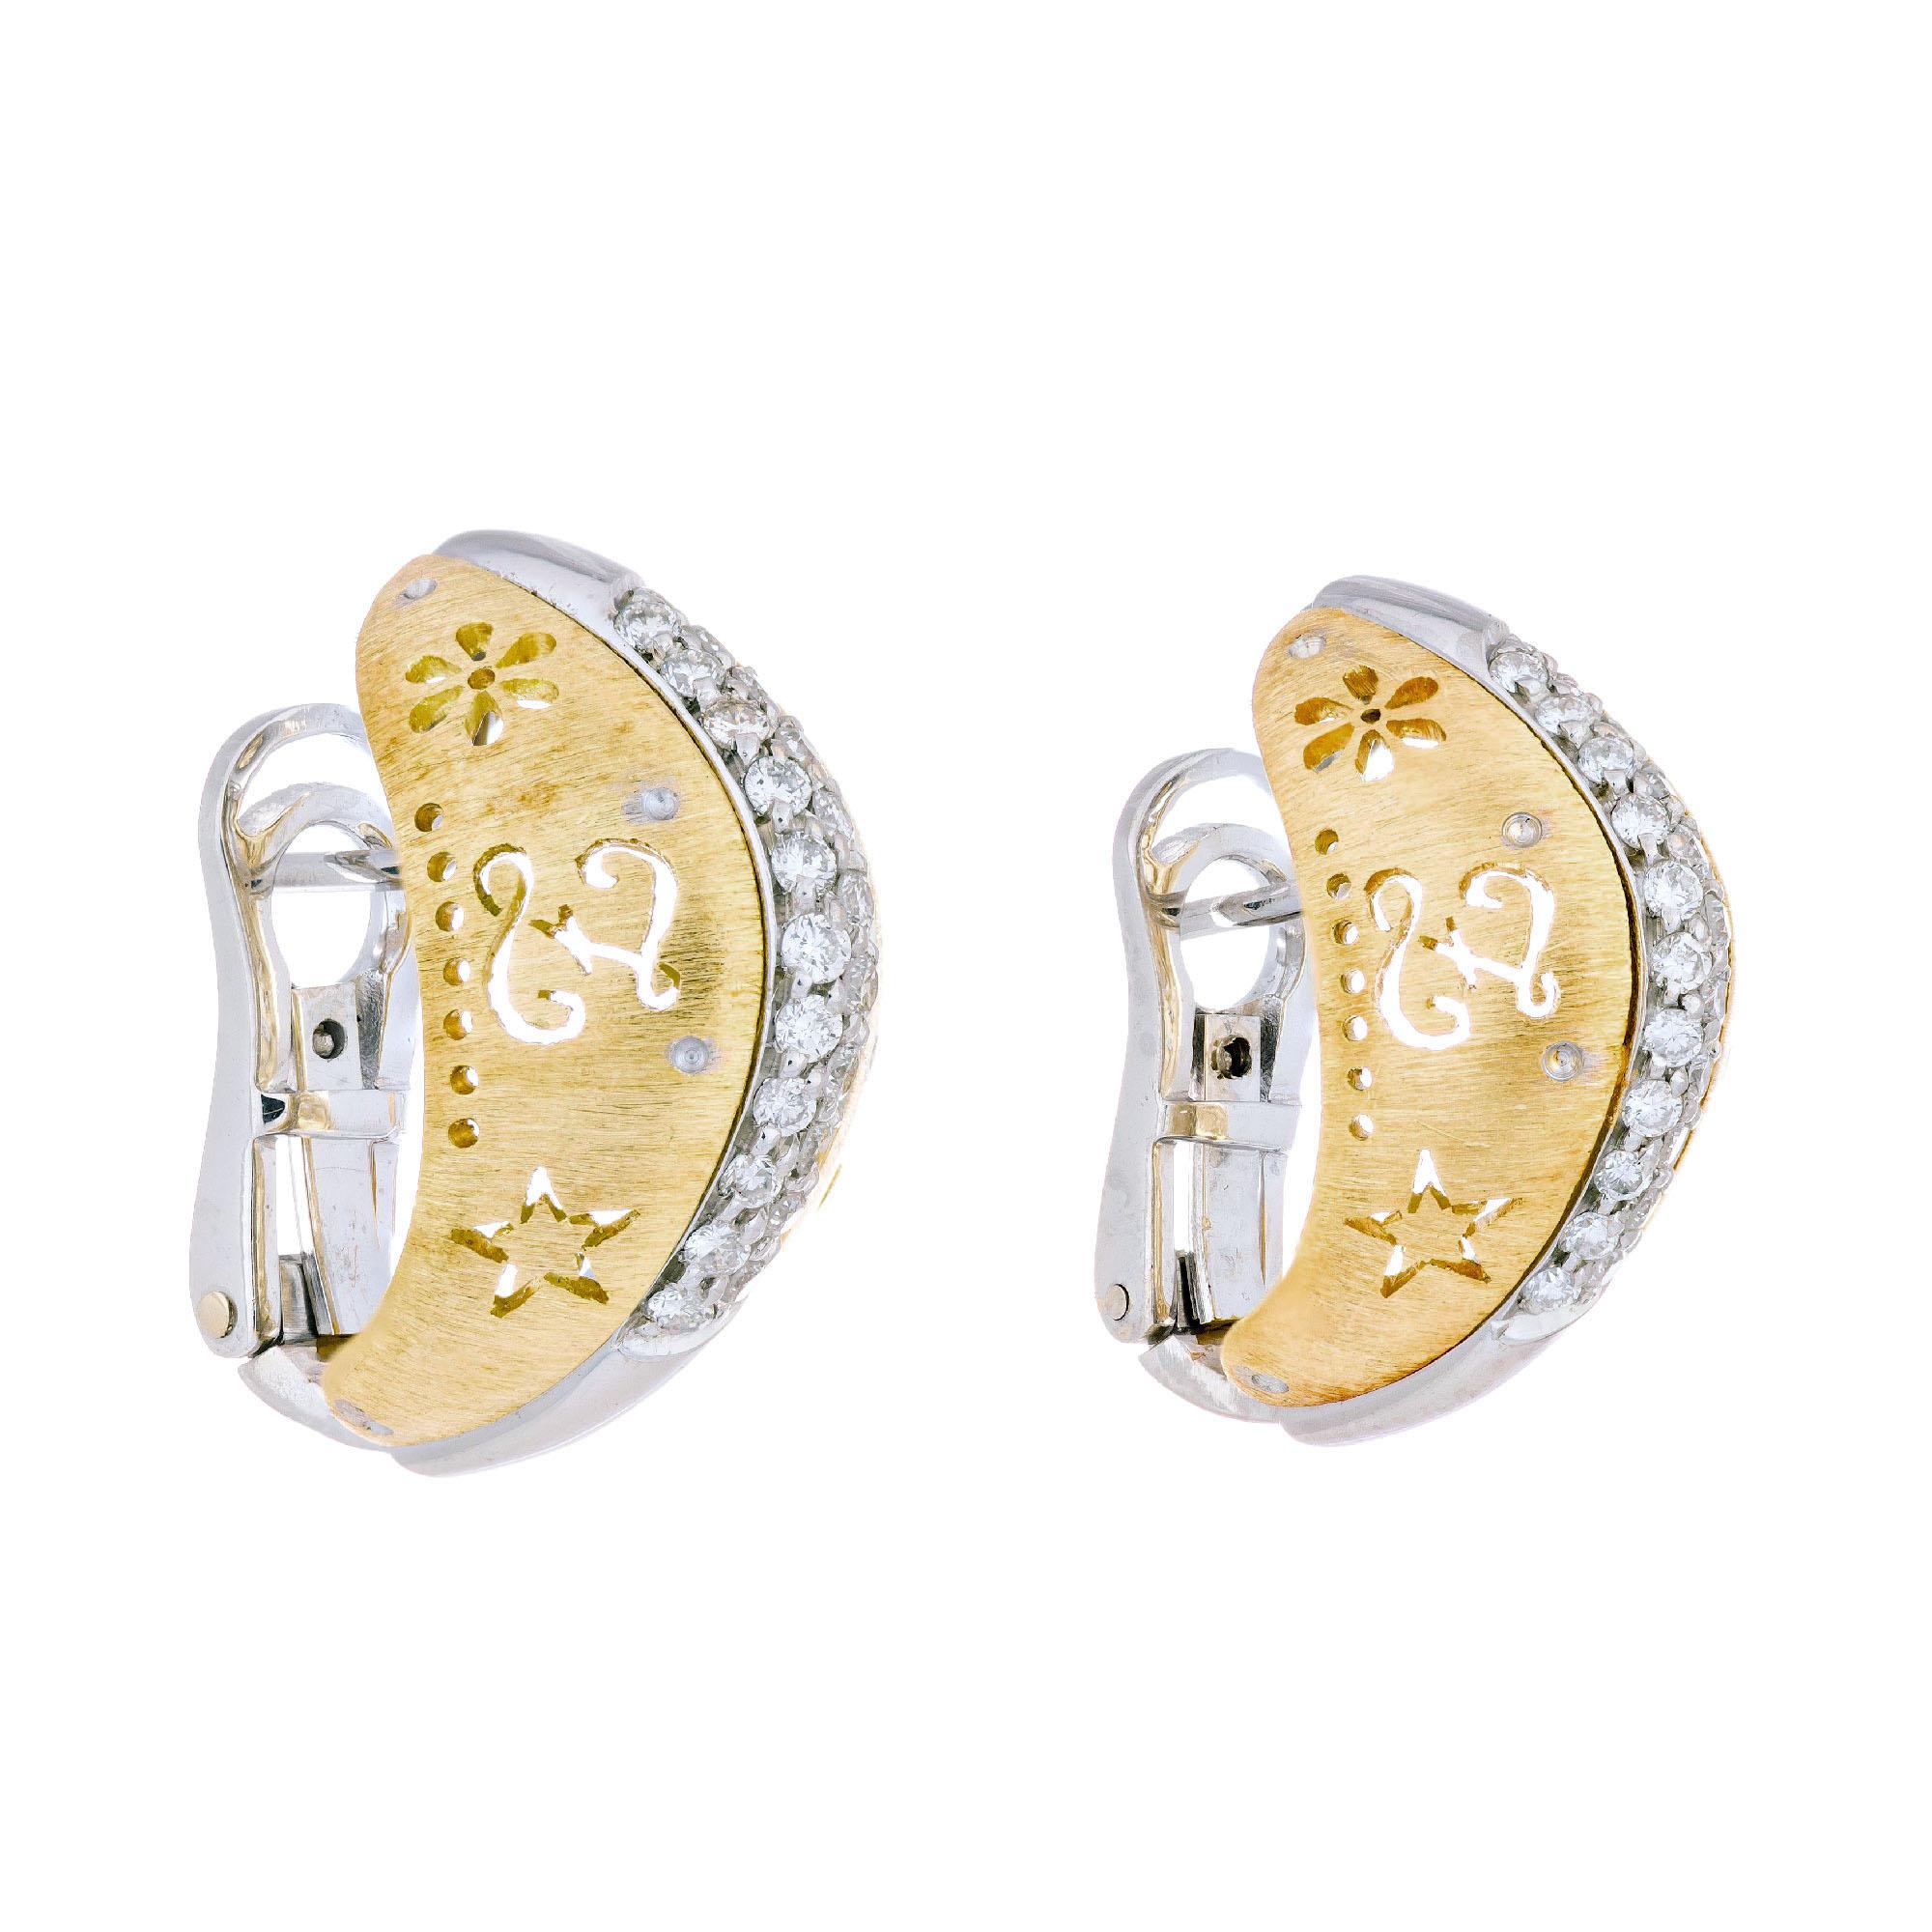 Hand pierced domed clip post lever back 18k yellow and white gold diamond earrings. Script on the side of each earring with 2 rows of diamonds down the middle. 

44 round brilliant cut diamonds, approx. total weight .28cts, G-H, VS
Tested: